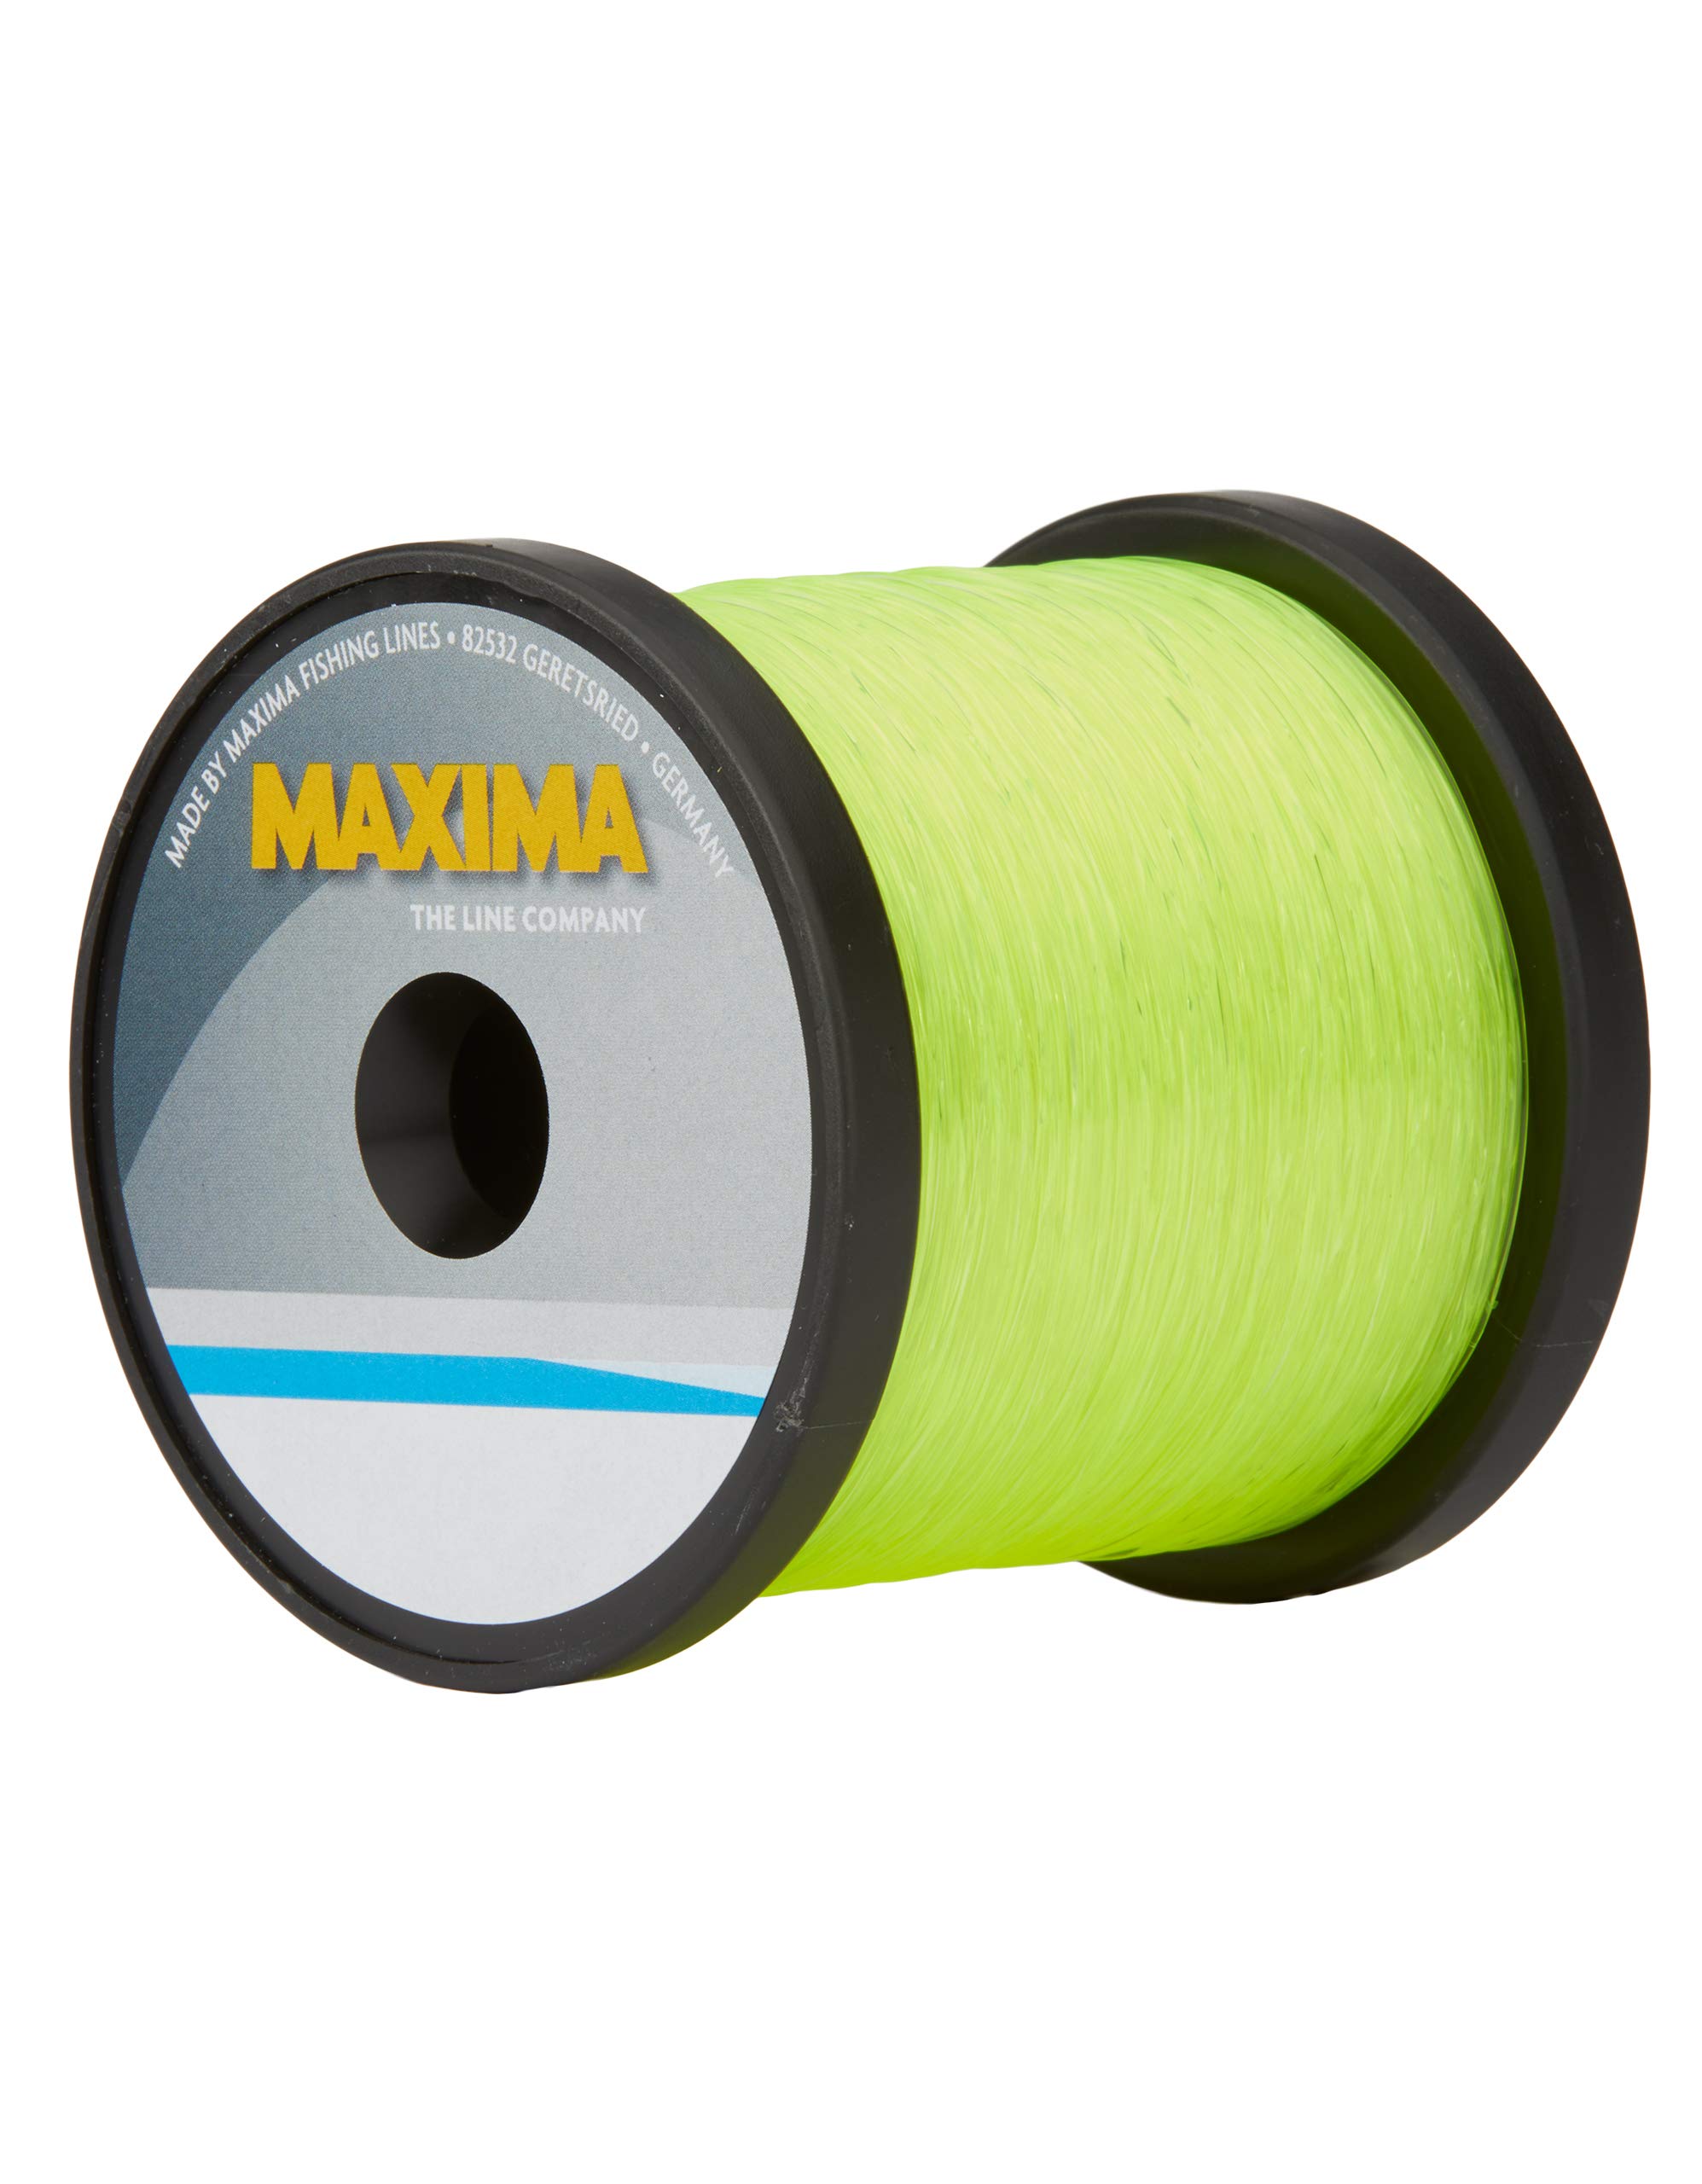 Maxima Fishing Line Guide Spools, High Visibility Yellow 8-pound